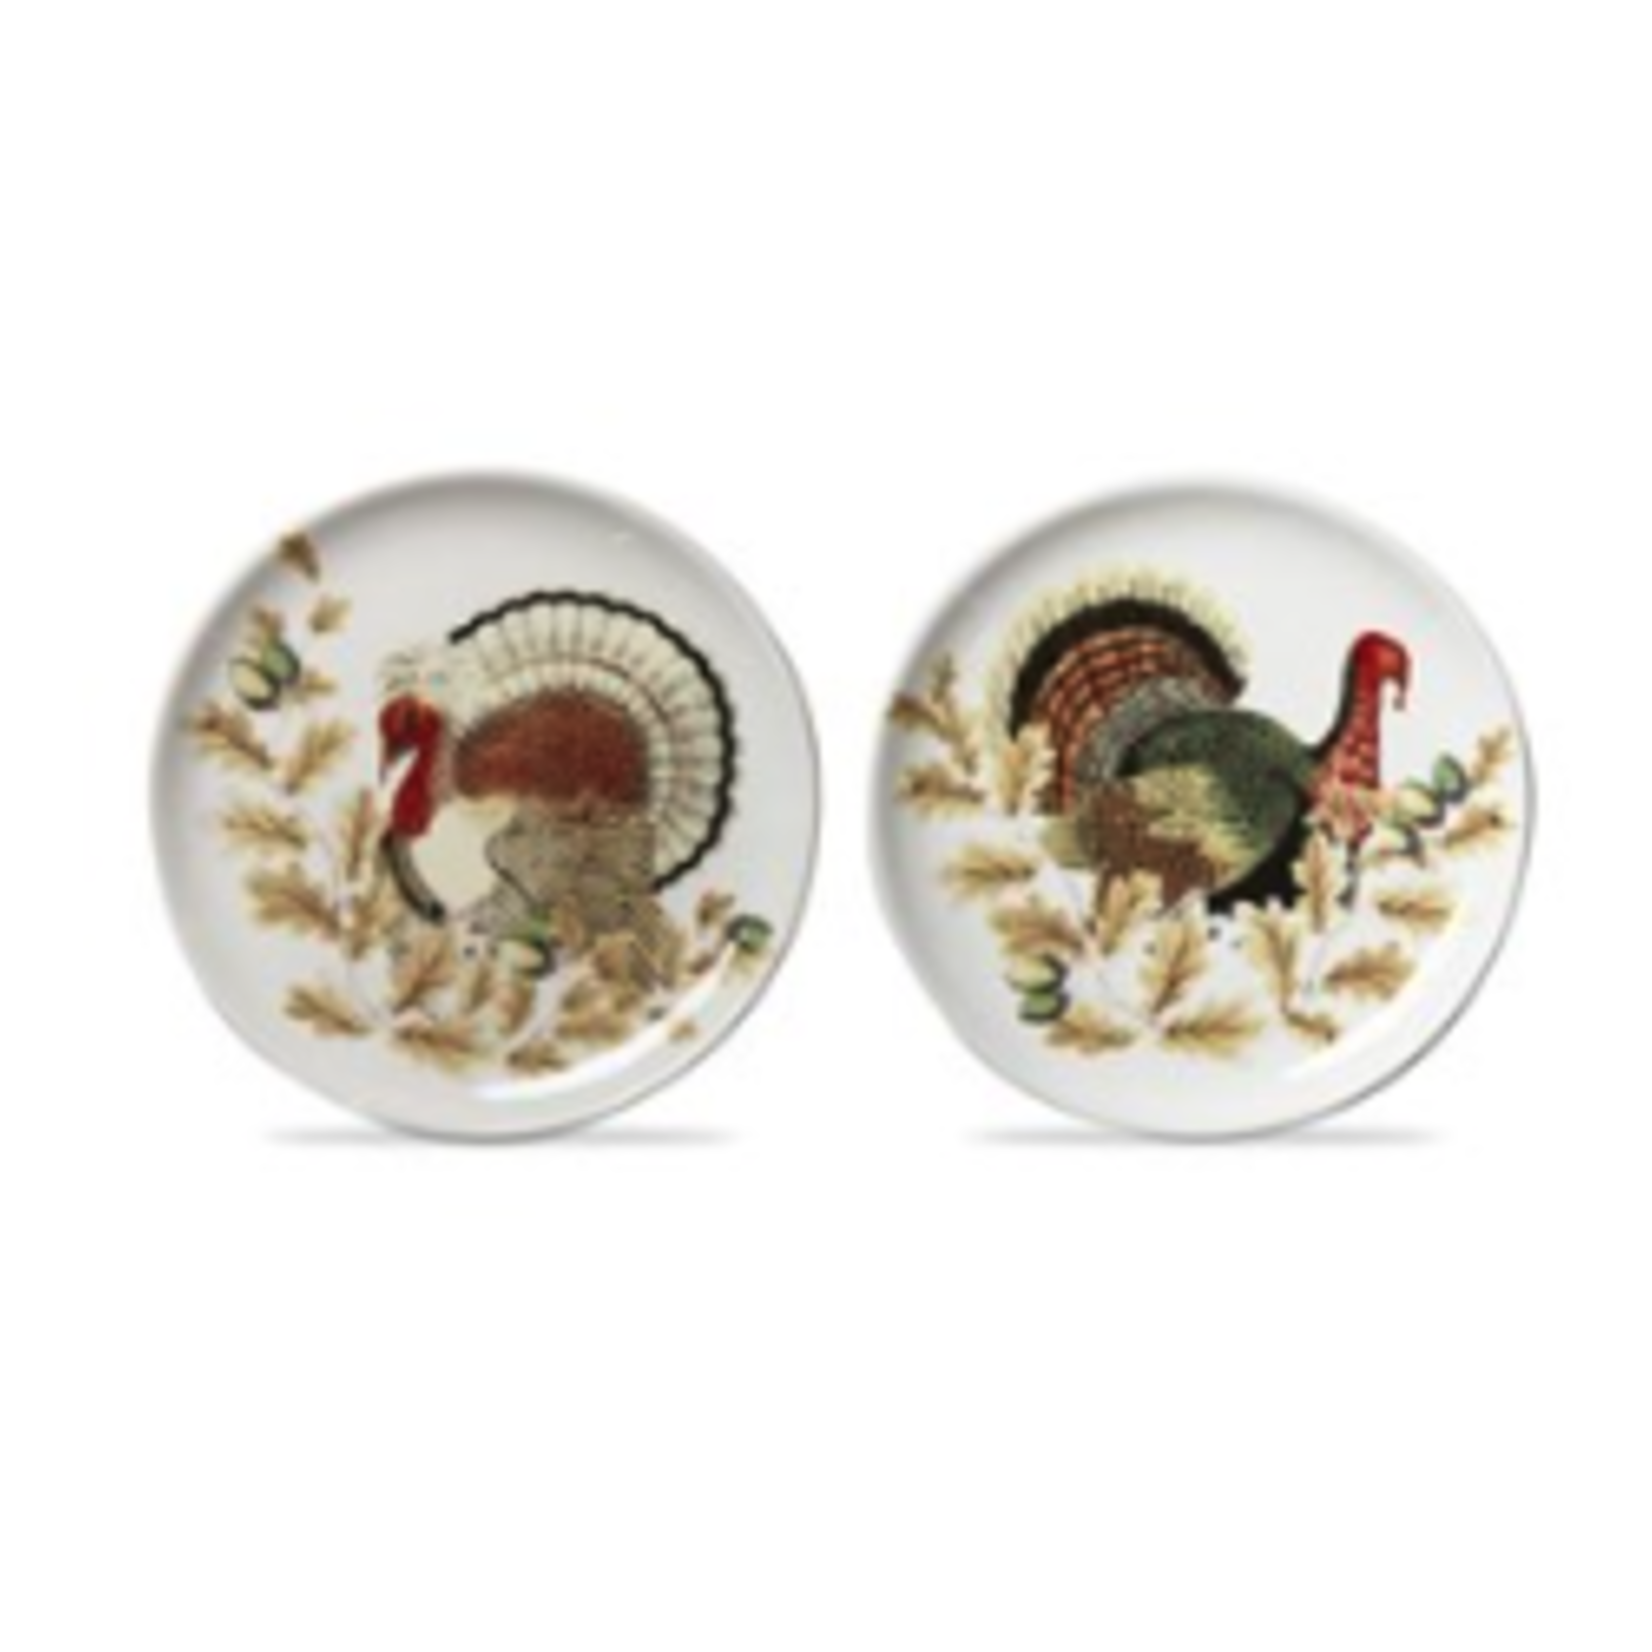 Tag Appetizer Plate - Turkey